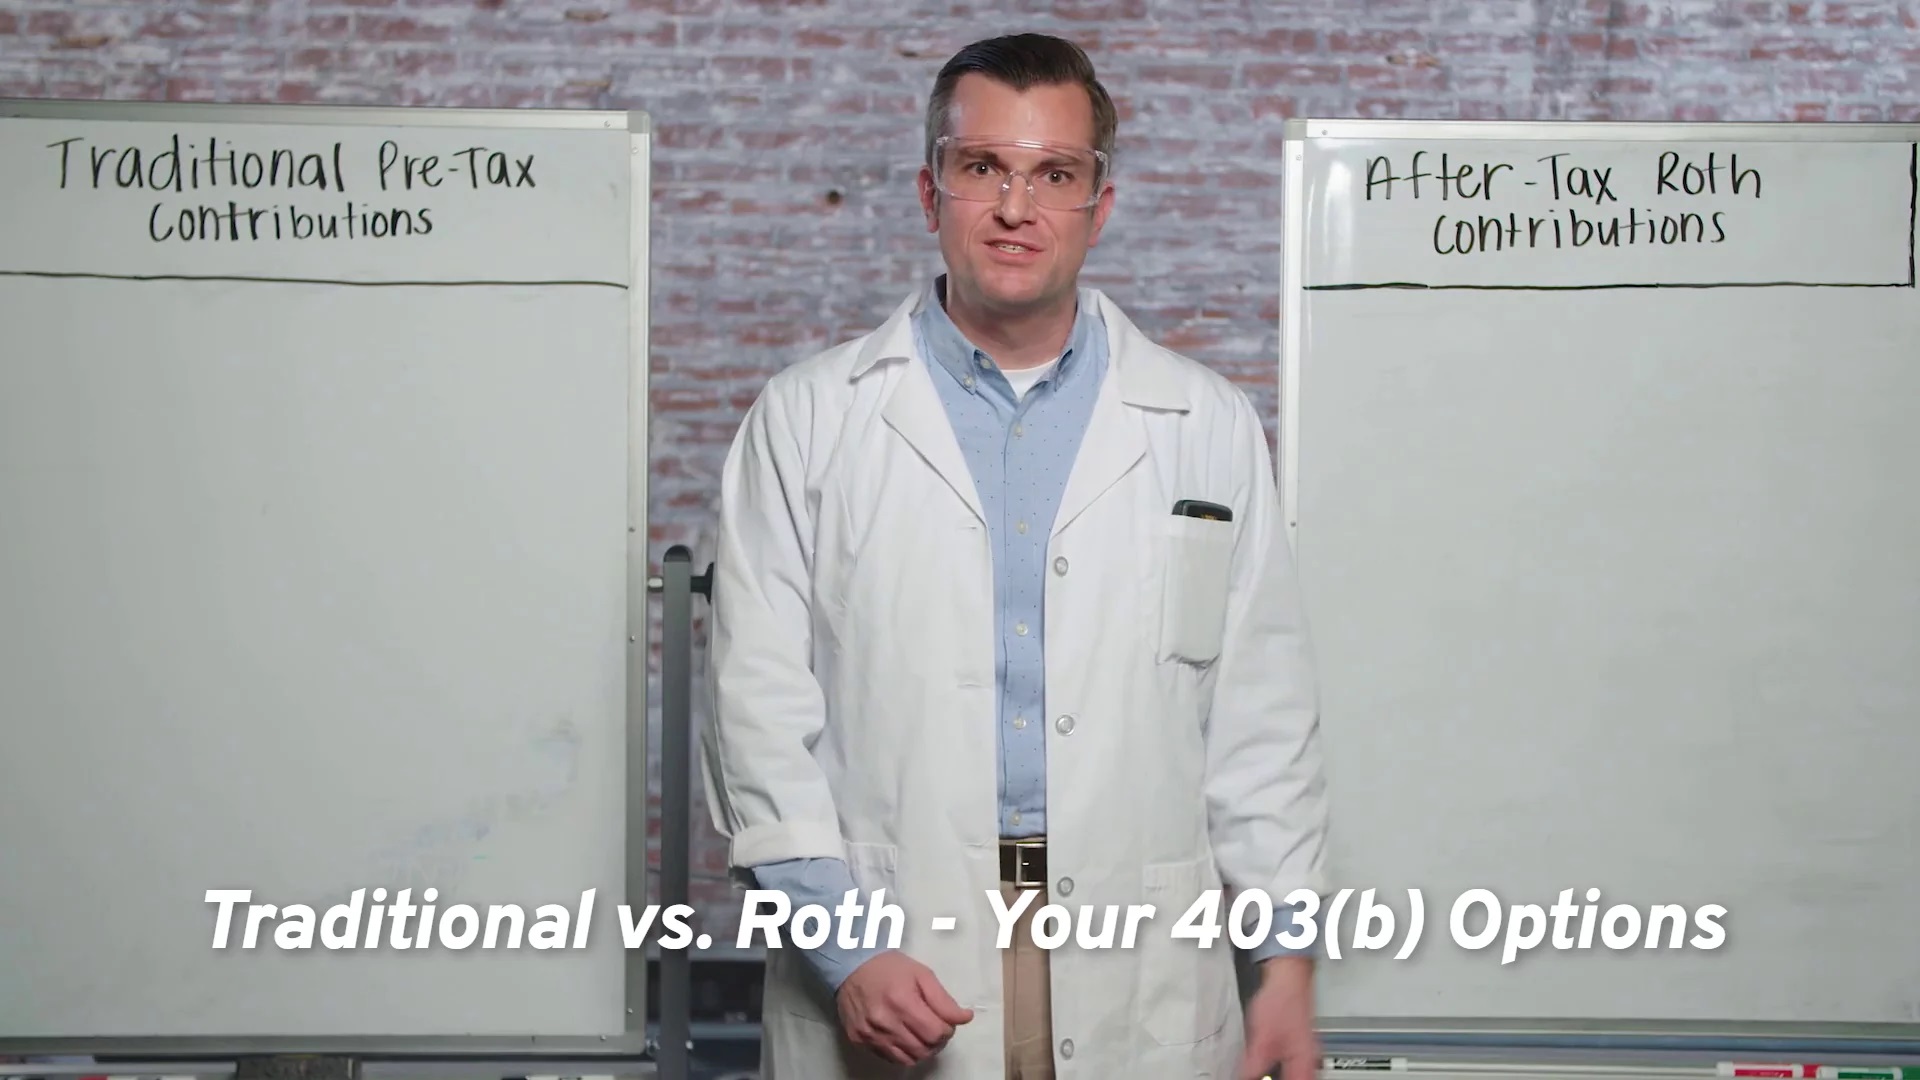 Traditional vs. Roth - Your 403(b) Options